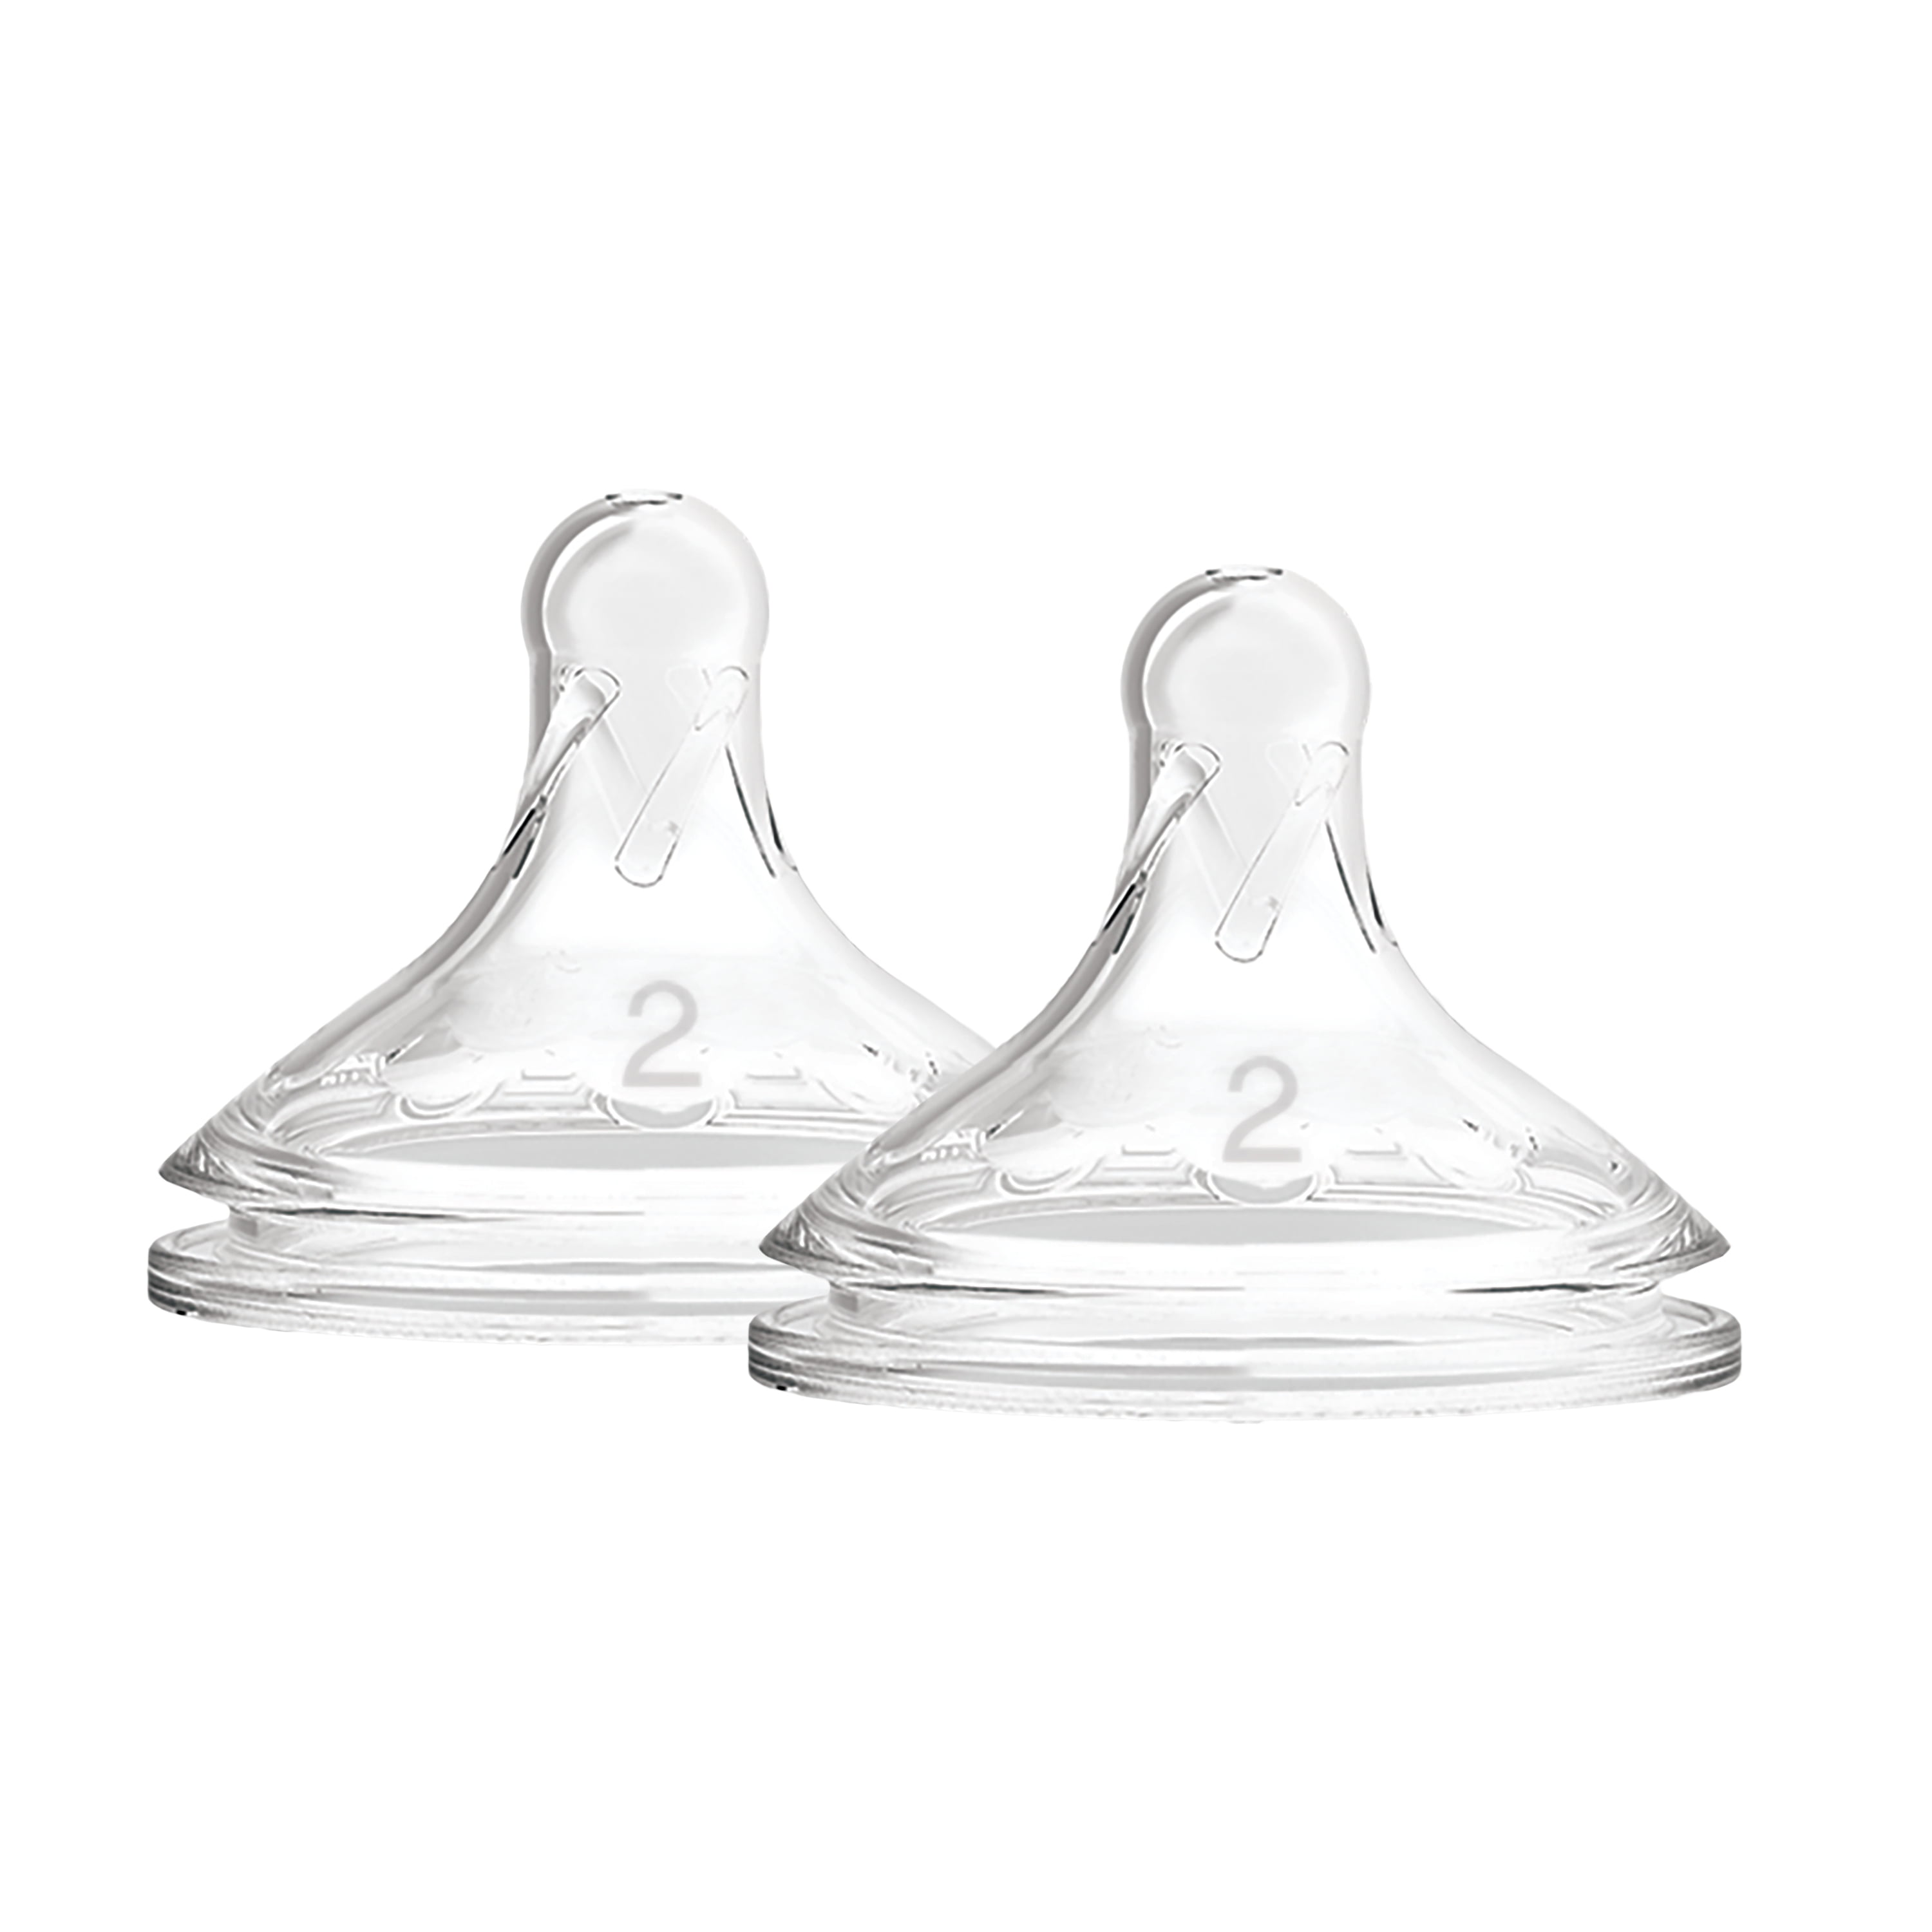 Dr. Brown's Natural Flow Options+ Wide-Neck Silicone Nipples, Level 2, 3m+,  2 count